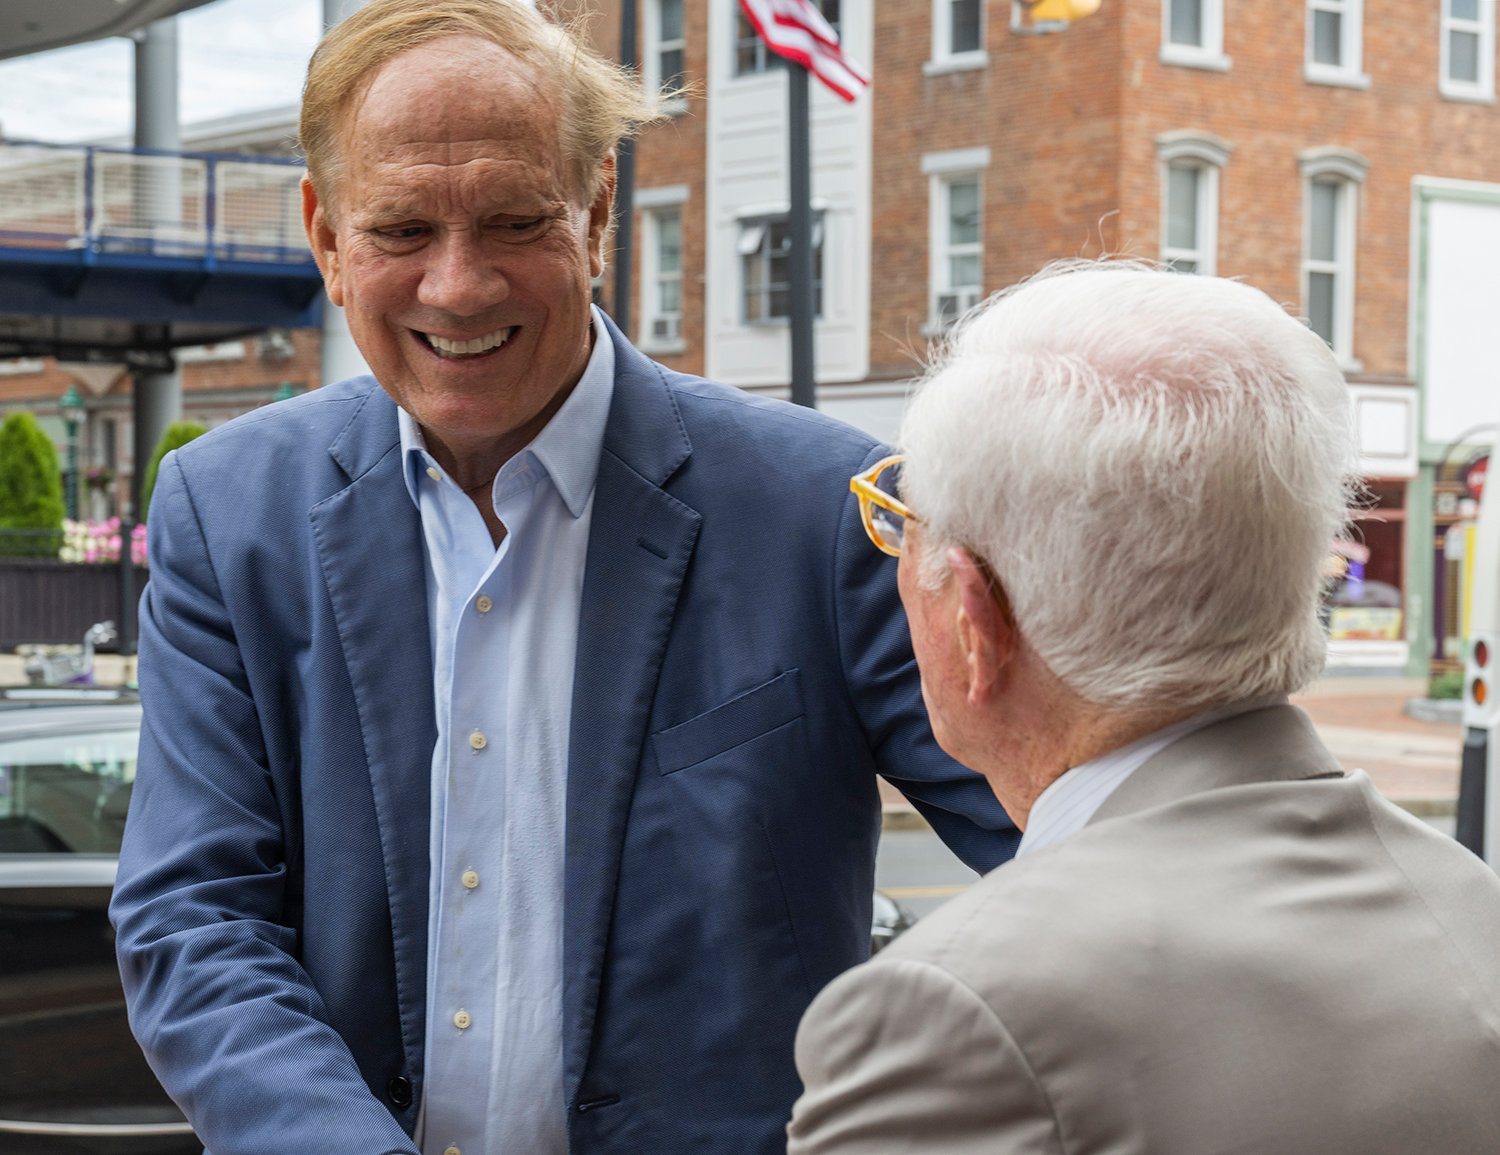 Former Governor George Pataki, left, shakes hands with Neal Golub after speaking in front of Proctors Theatre on State Street in Schenectady Tuesday, Aug. 9.